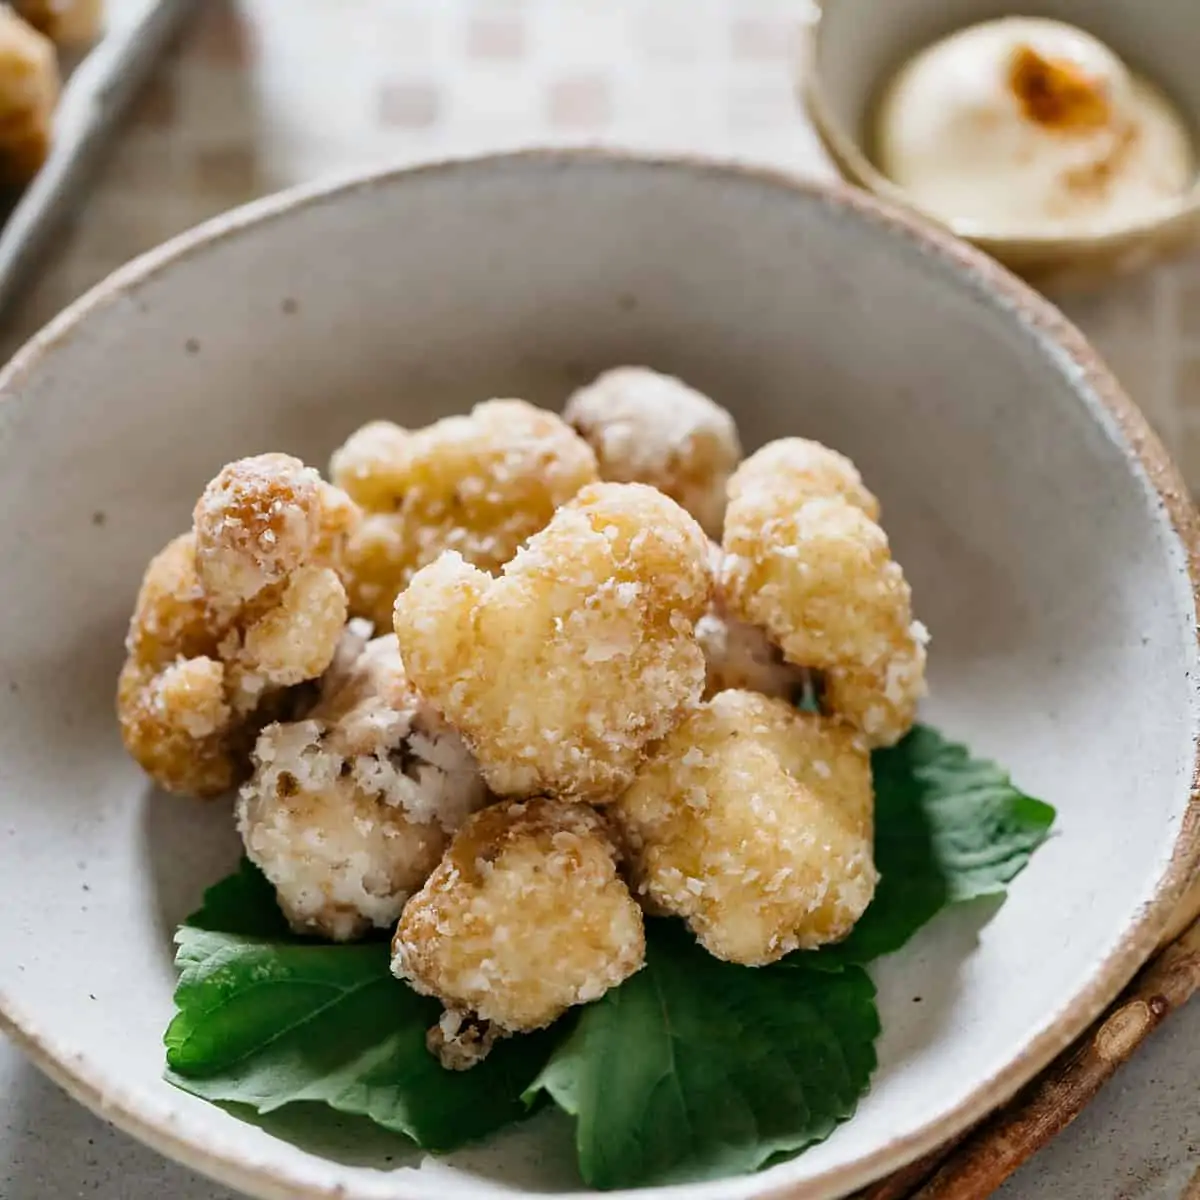 Fried cauliflower karaage is served with shiso leaves in a shallow bowl